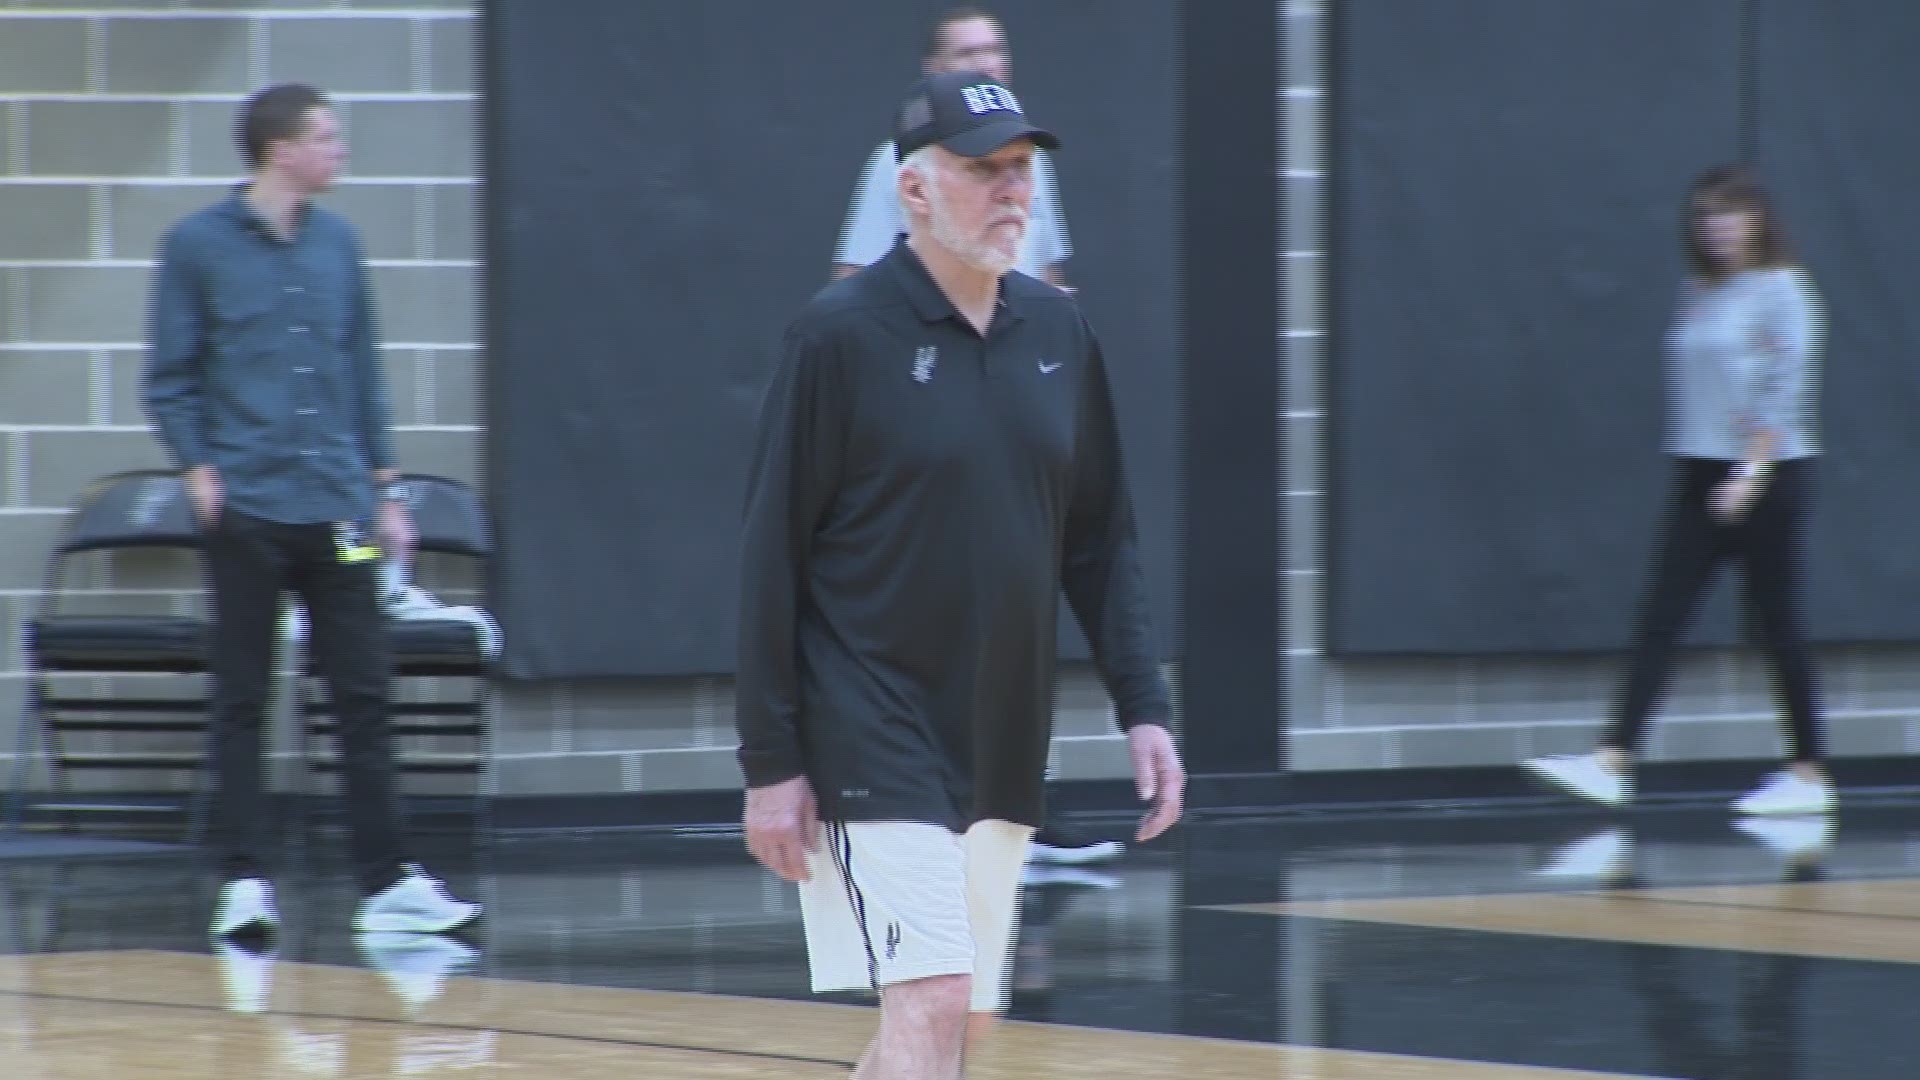 At San Antonio Spurs practice on Friday, head coach Gregg Popovich wore a black cap with the word "BETO" on it, presumably showing his support for the Democratic U.S. Senate candidate.